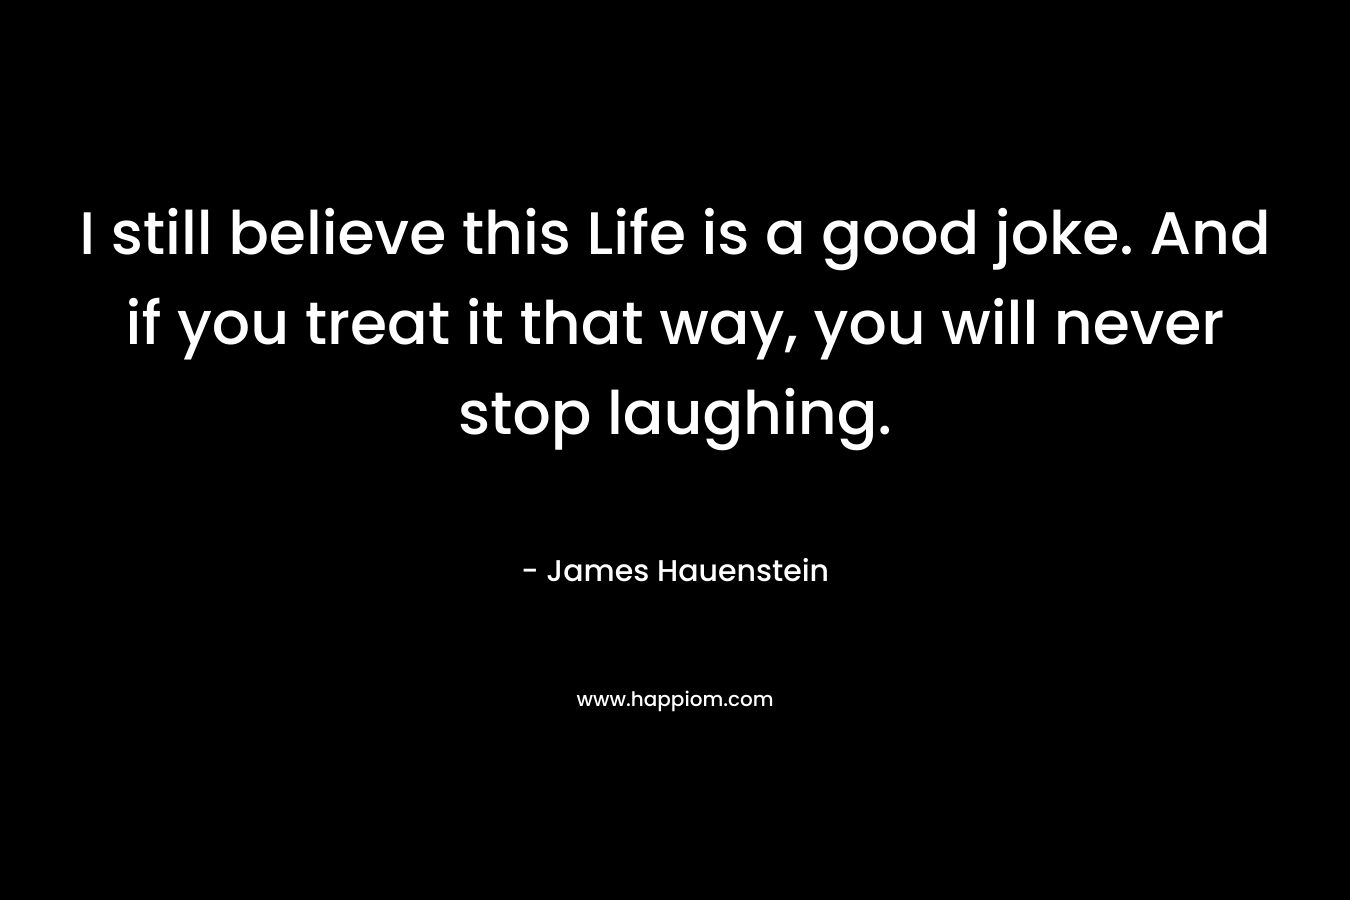 I still believe this Life is a good joke. And if you treat it that way, you will never stop laughing. – James Hauenstein